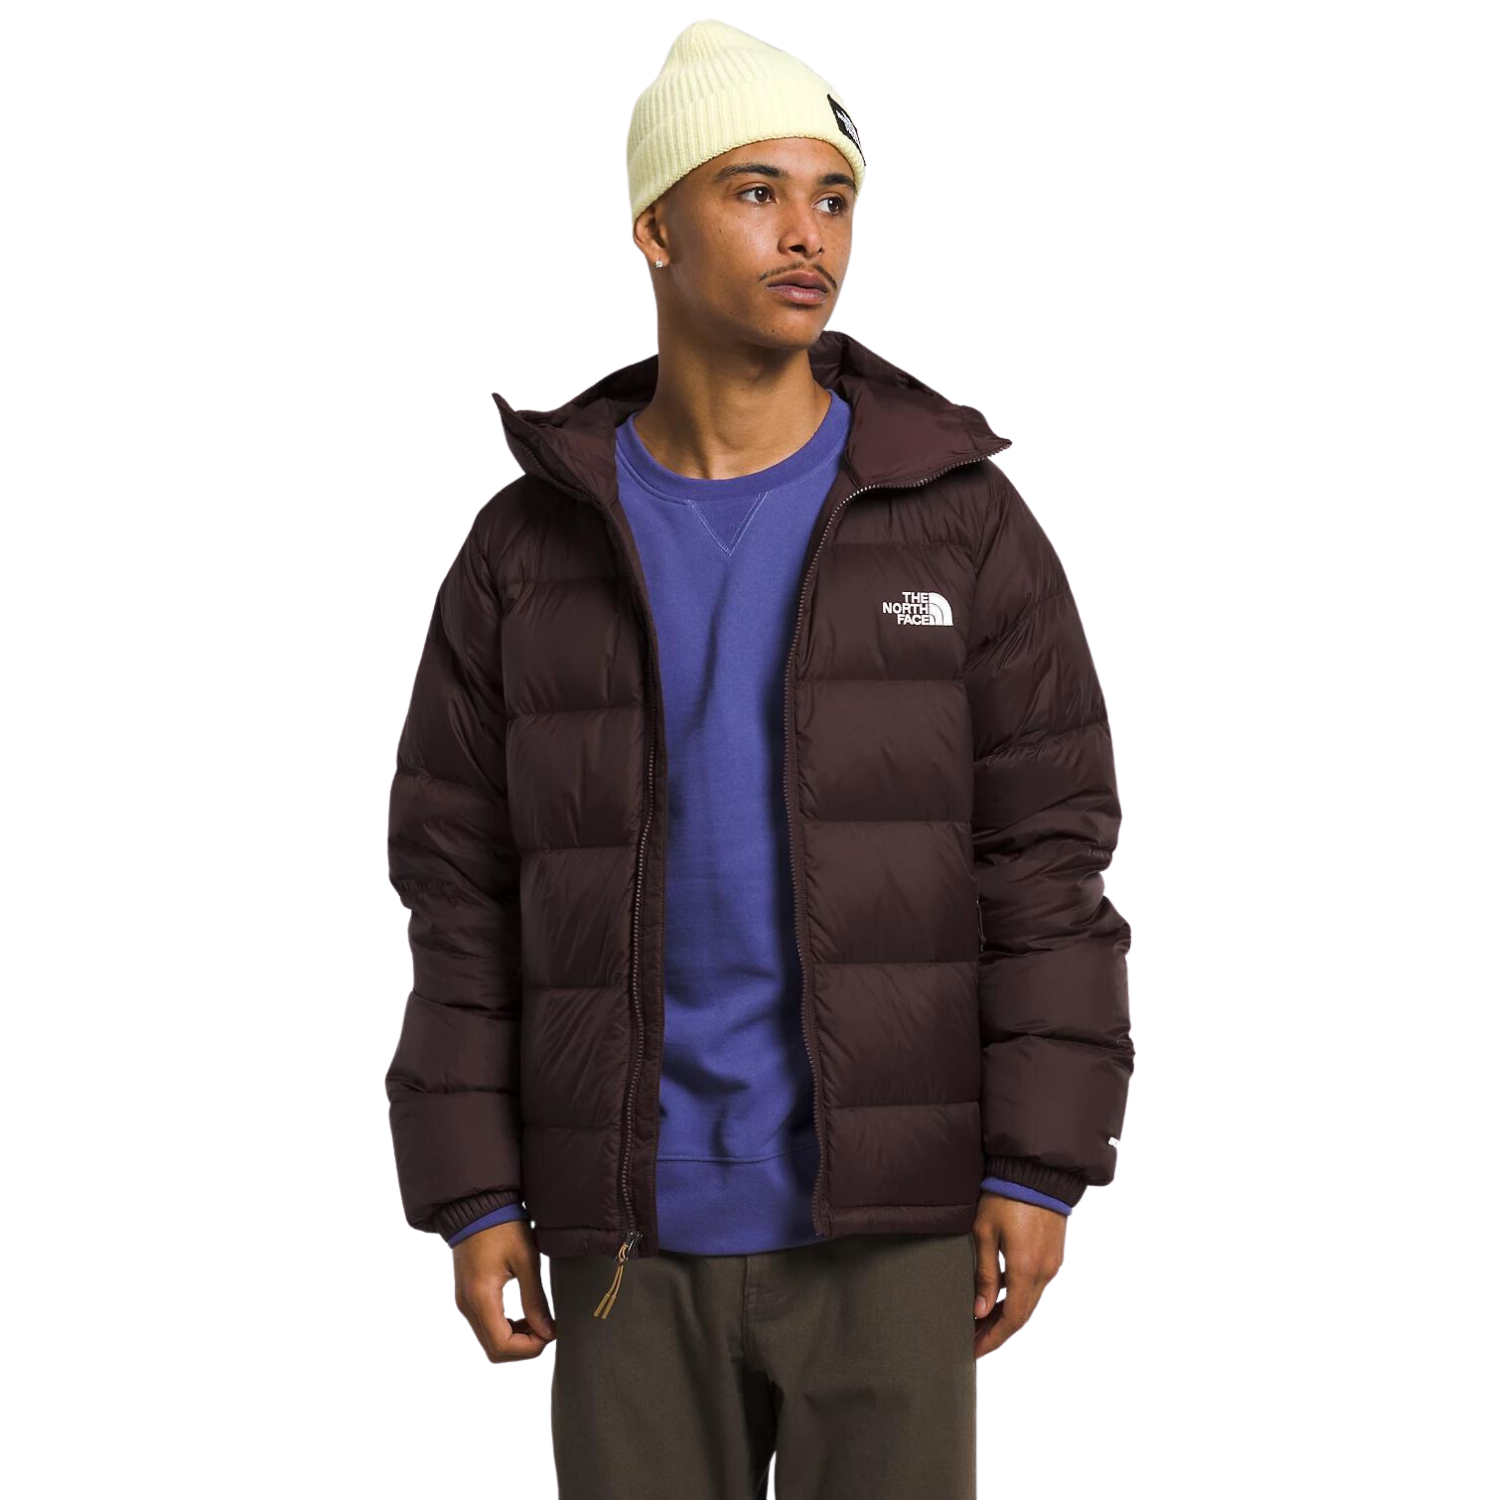 The North Face -Summit Series 700 Down